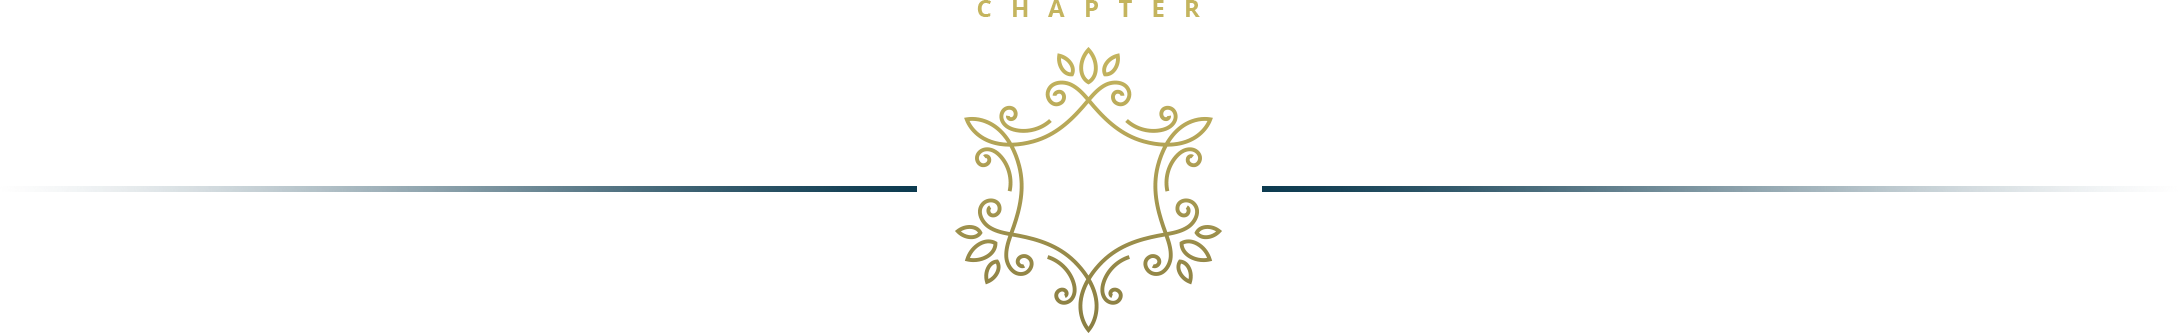 Chapitre II: The Foundation of an Awesome Community